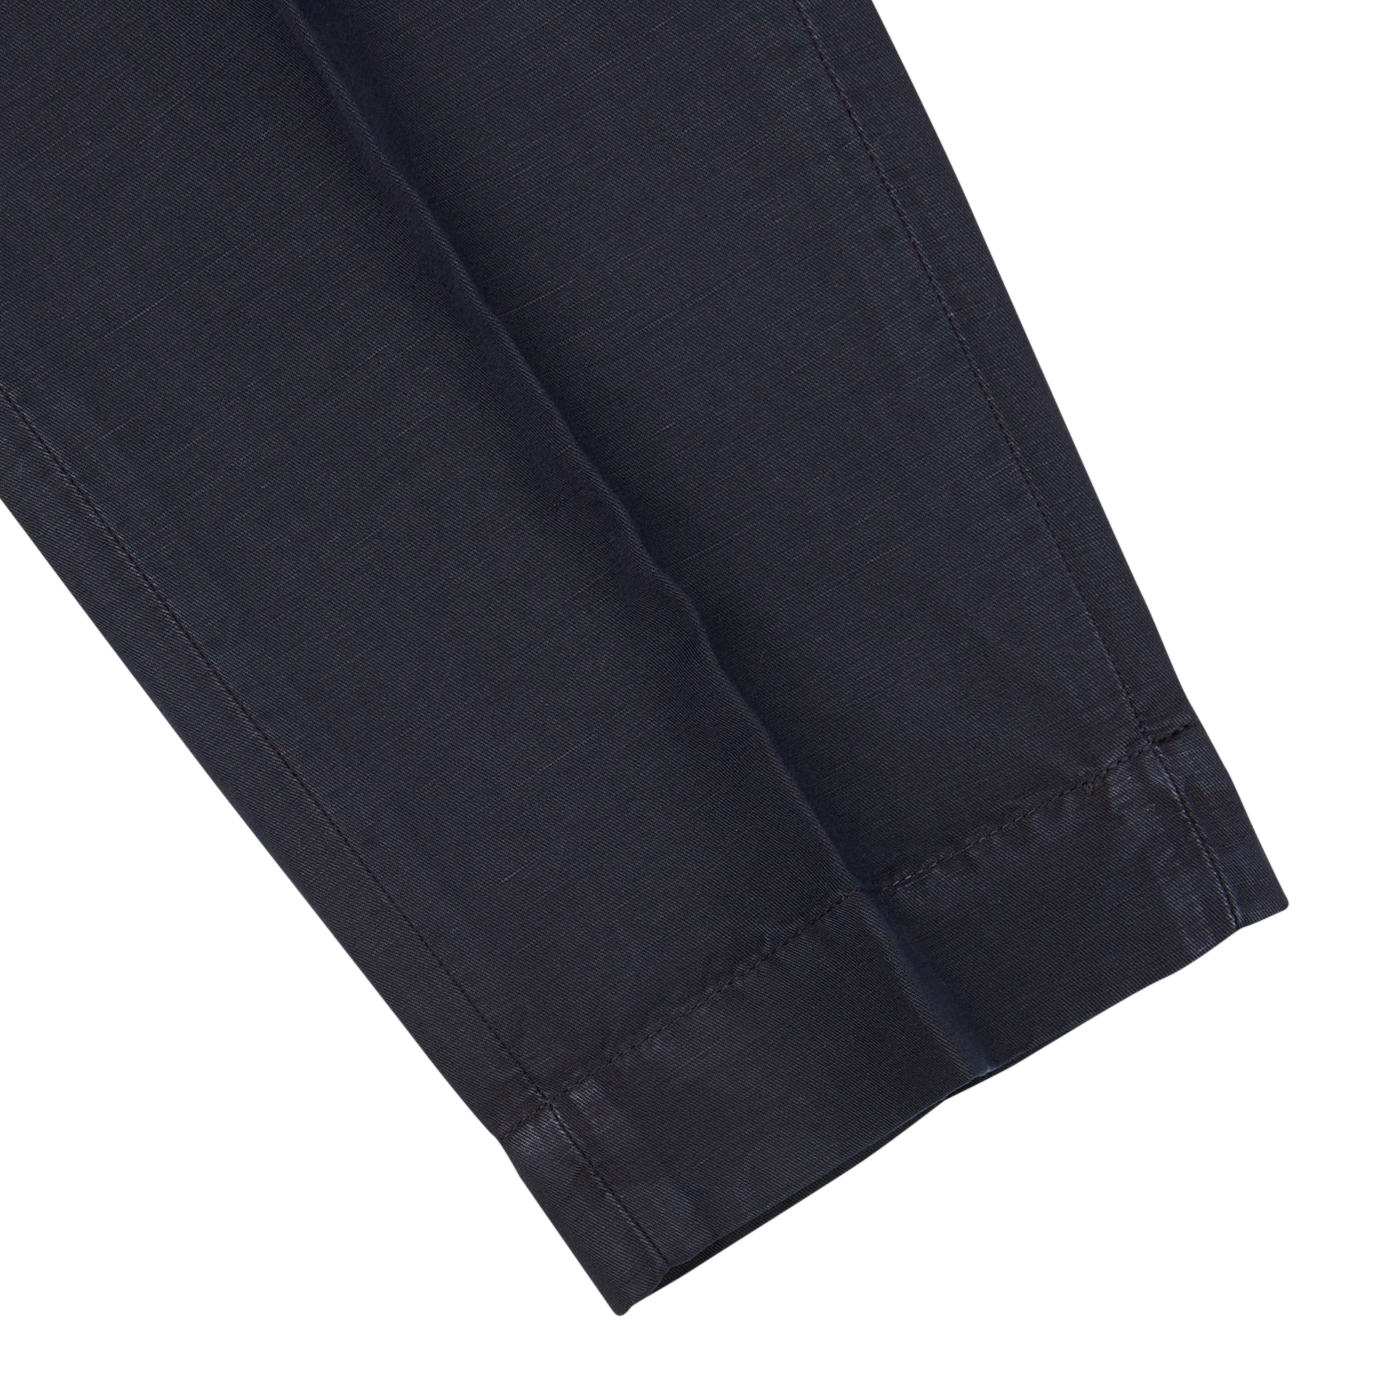 Navy blue Slowear washed chinolino suit pants with visible seams on a white background.